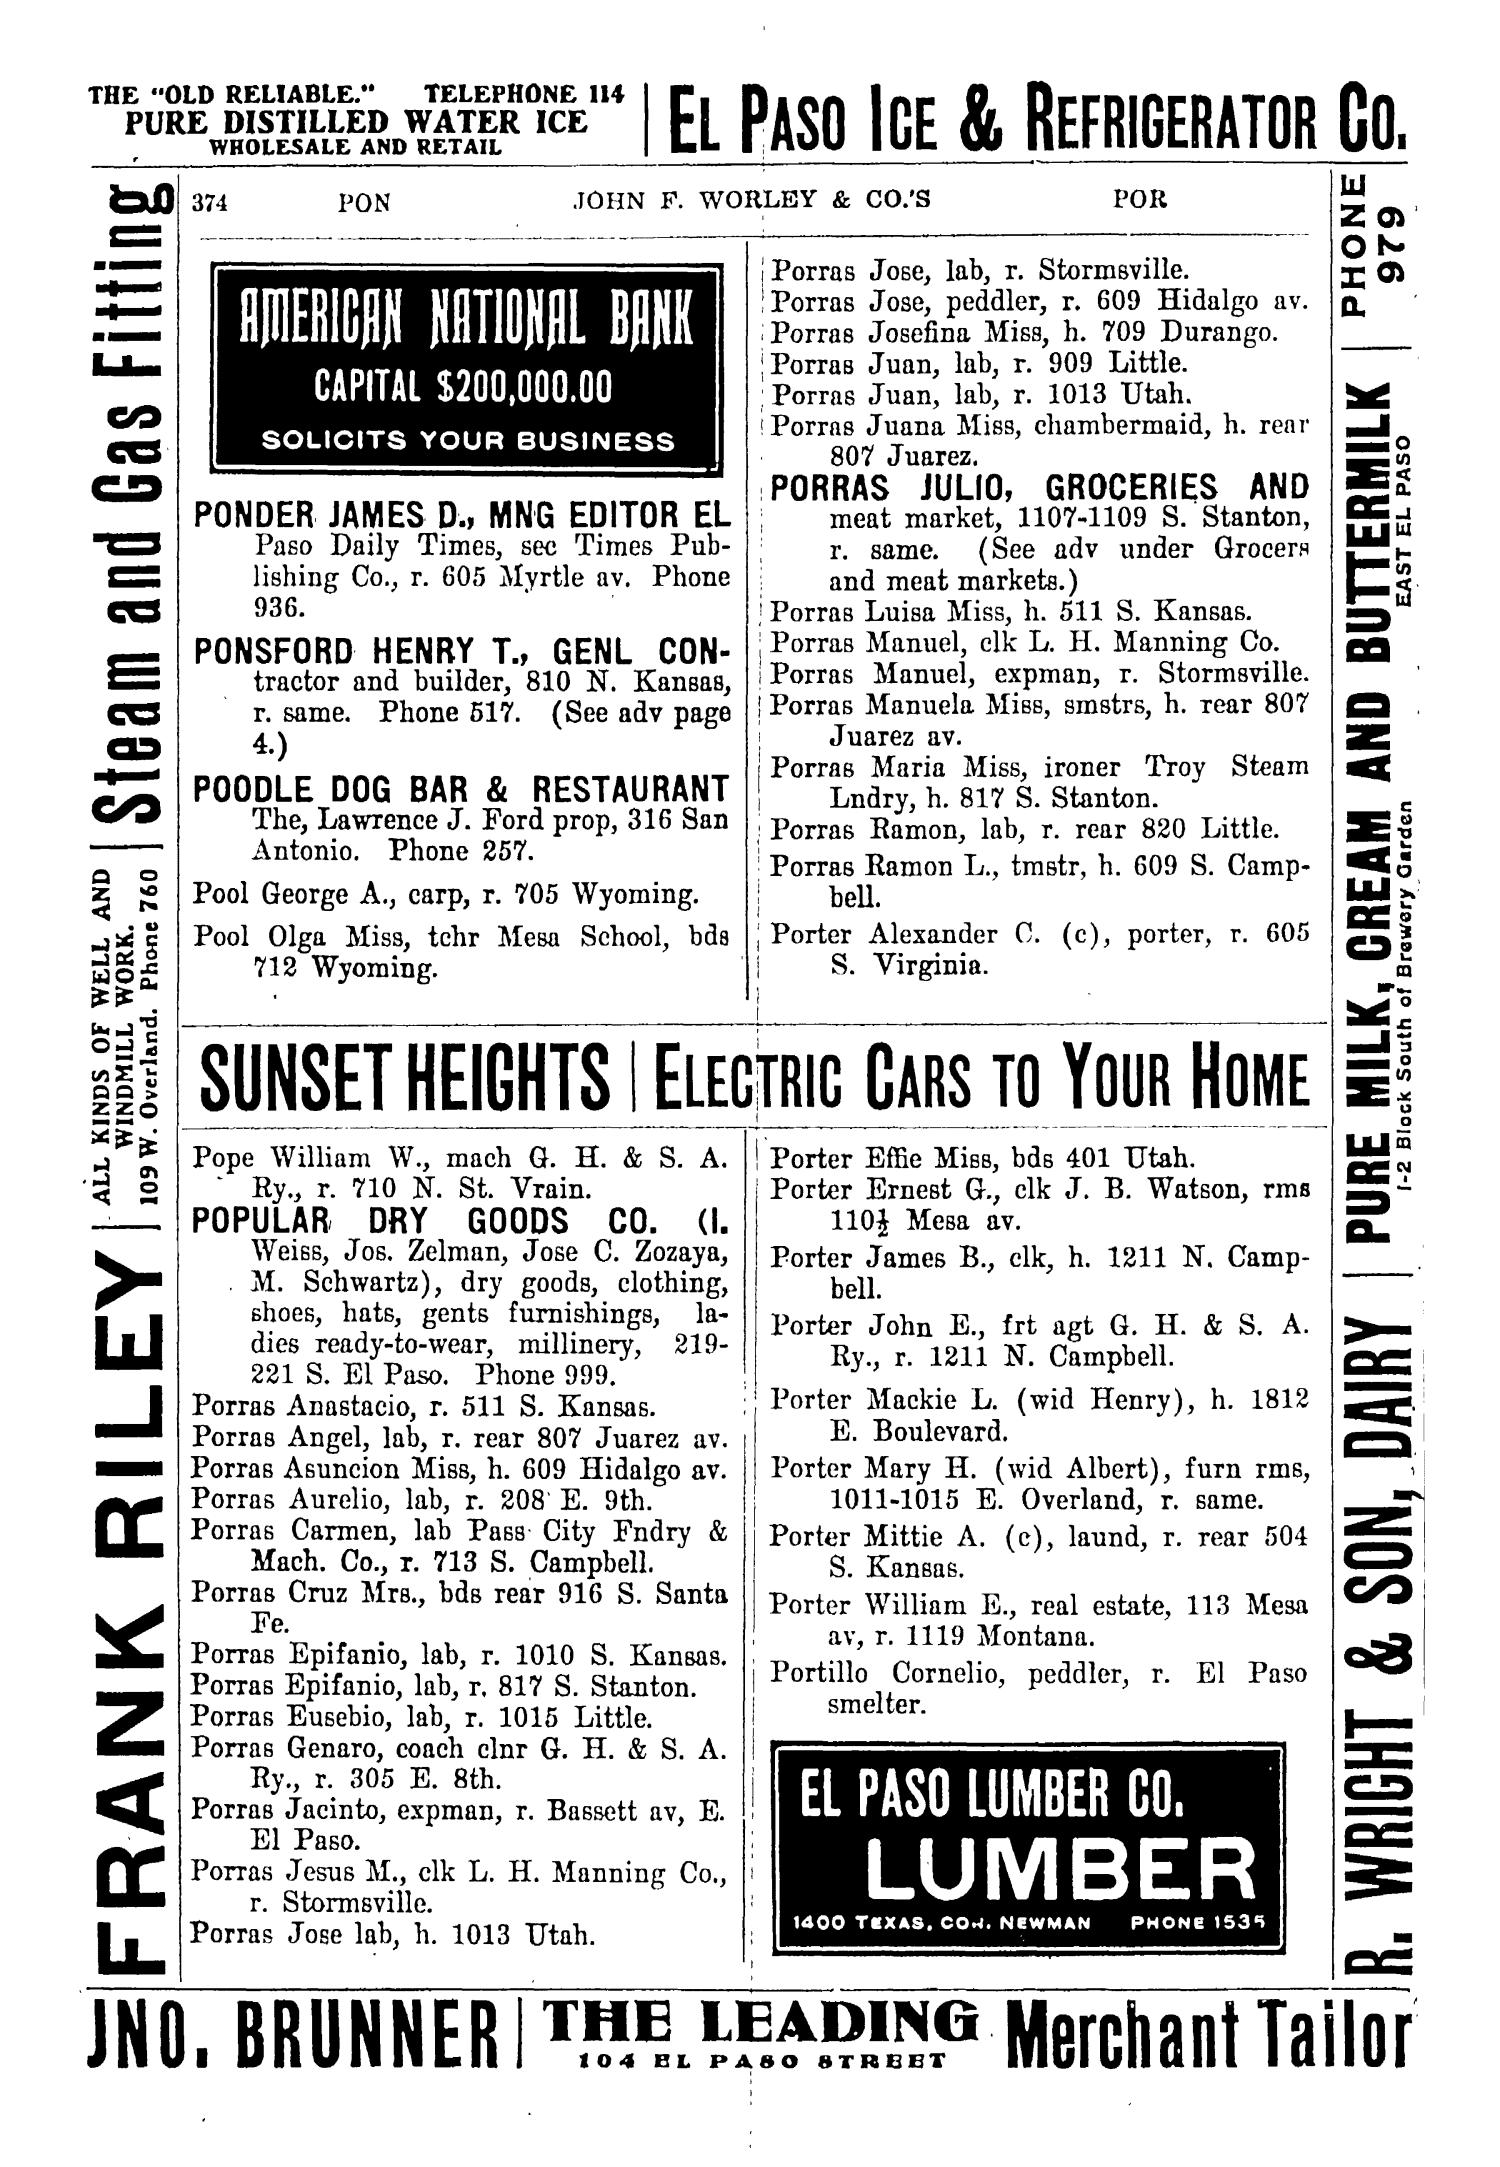 John F. Worley & Co.'s El Paso Directory for 1906
                                                
                                                    374
                                                